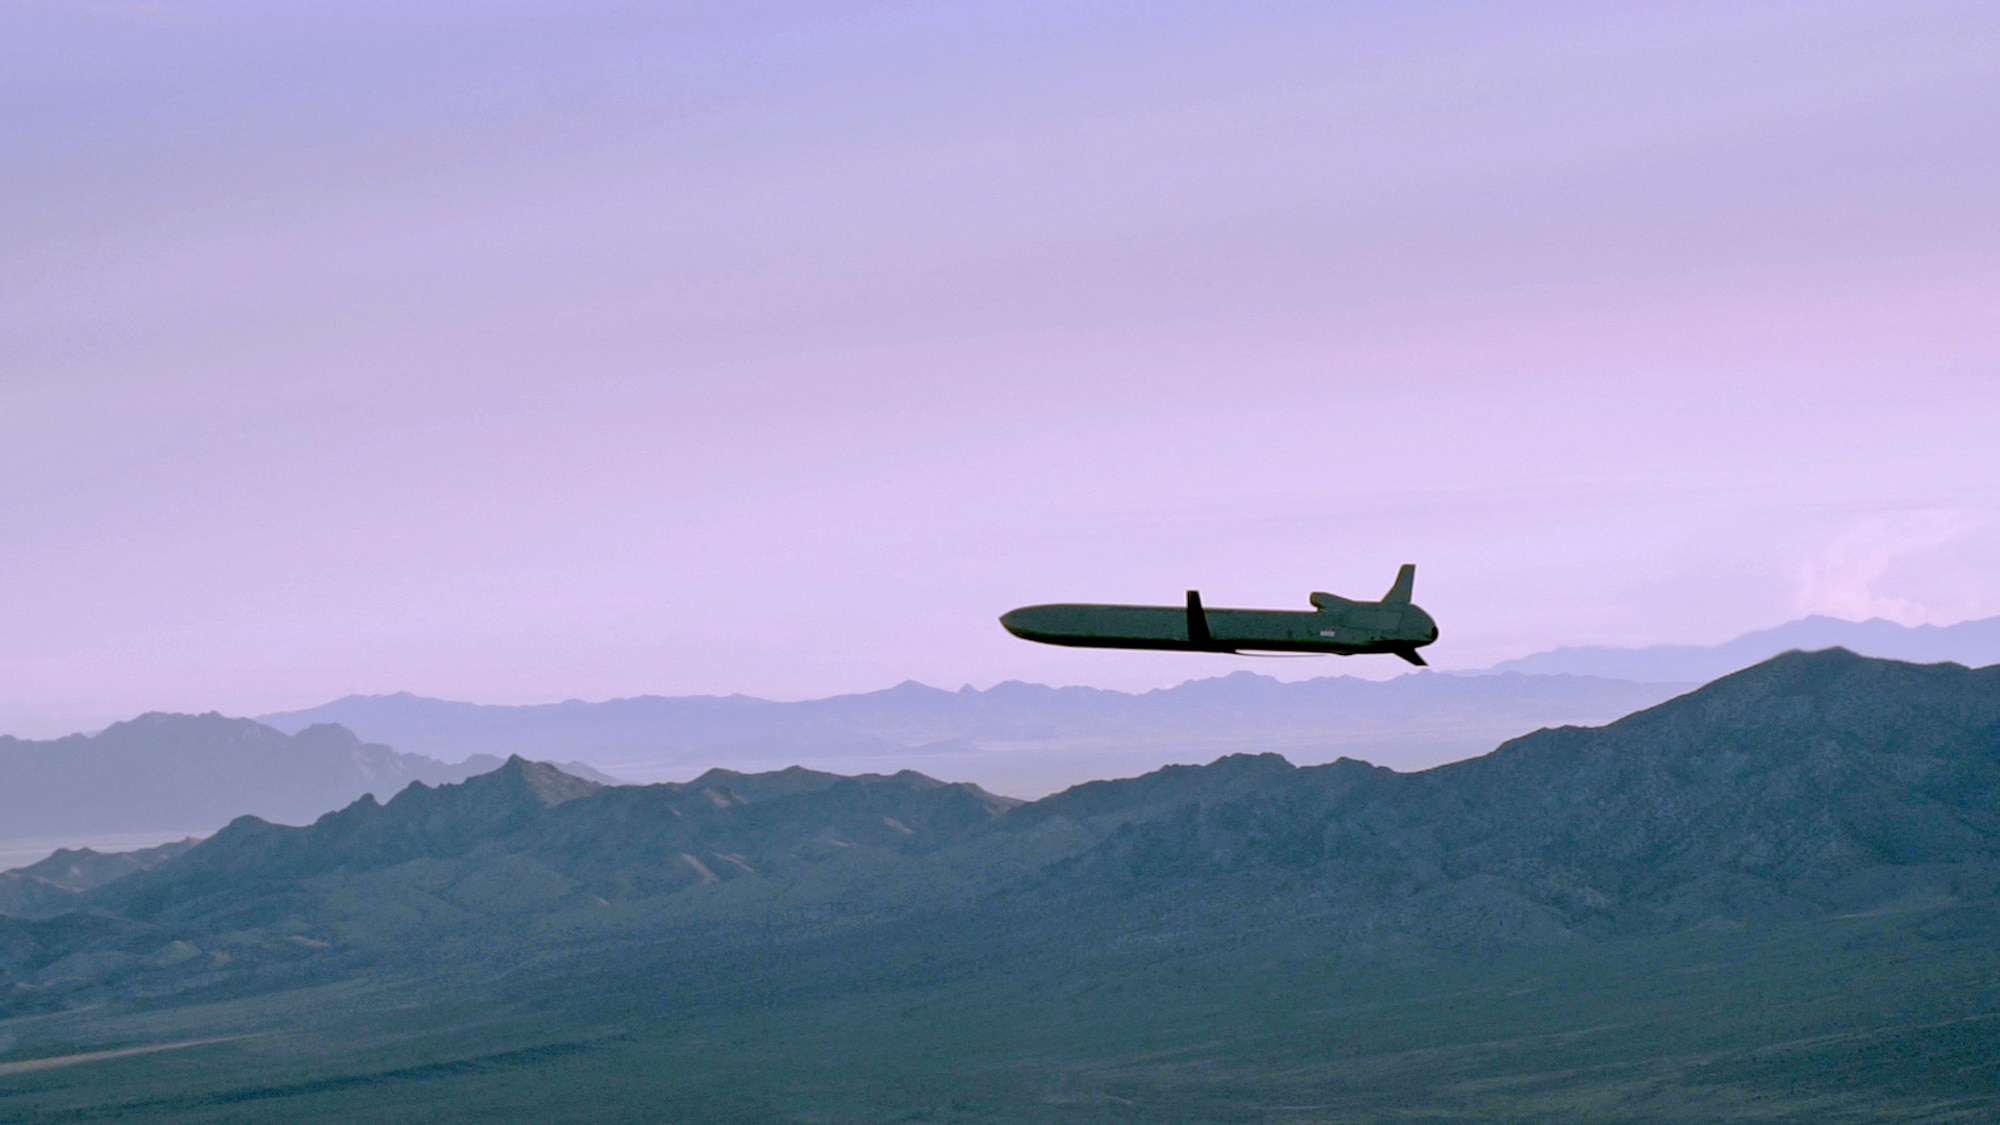 An unarmed AGM-86B air-launched cruise missile maneuvers over the Utah Test and Training Range enroute to its final target Sept. 22, 2014, during a Nuclear Weapons System Evaluation Program simulated combat mission. The new Air Force Nuclear Weapons Center’s Air Delivered Capabilities Directorate, referred to as “ND,” has several divisions to include engineering; strategic systems, nuclear weapons systems integration; outside continental U.S. support,; nuclear weapons acquisition; and cruise missile sustainment. (U.S. Air Force photo/Staff Sgt. Roidan Carlson)